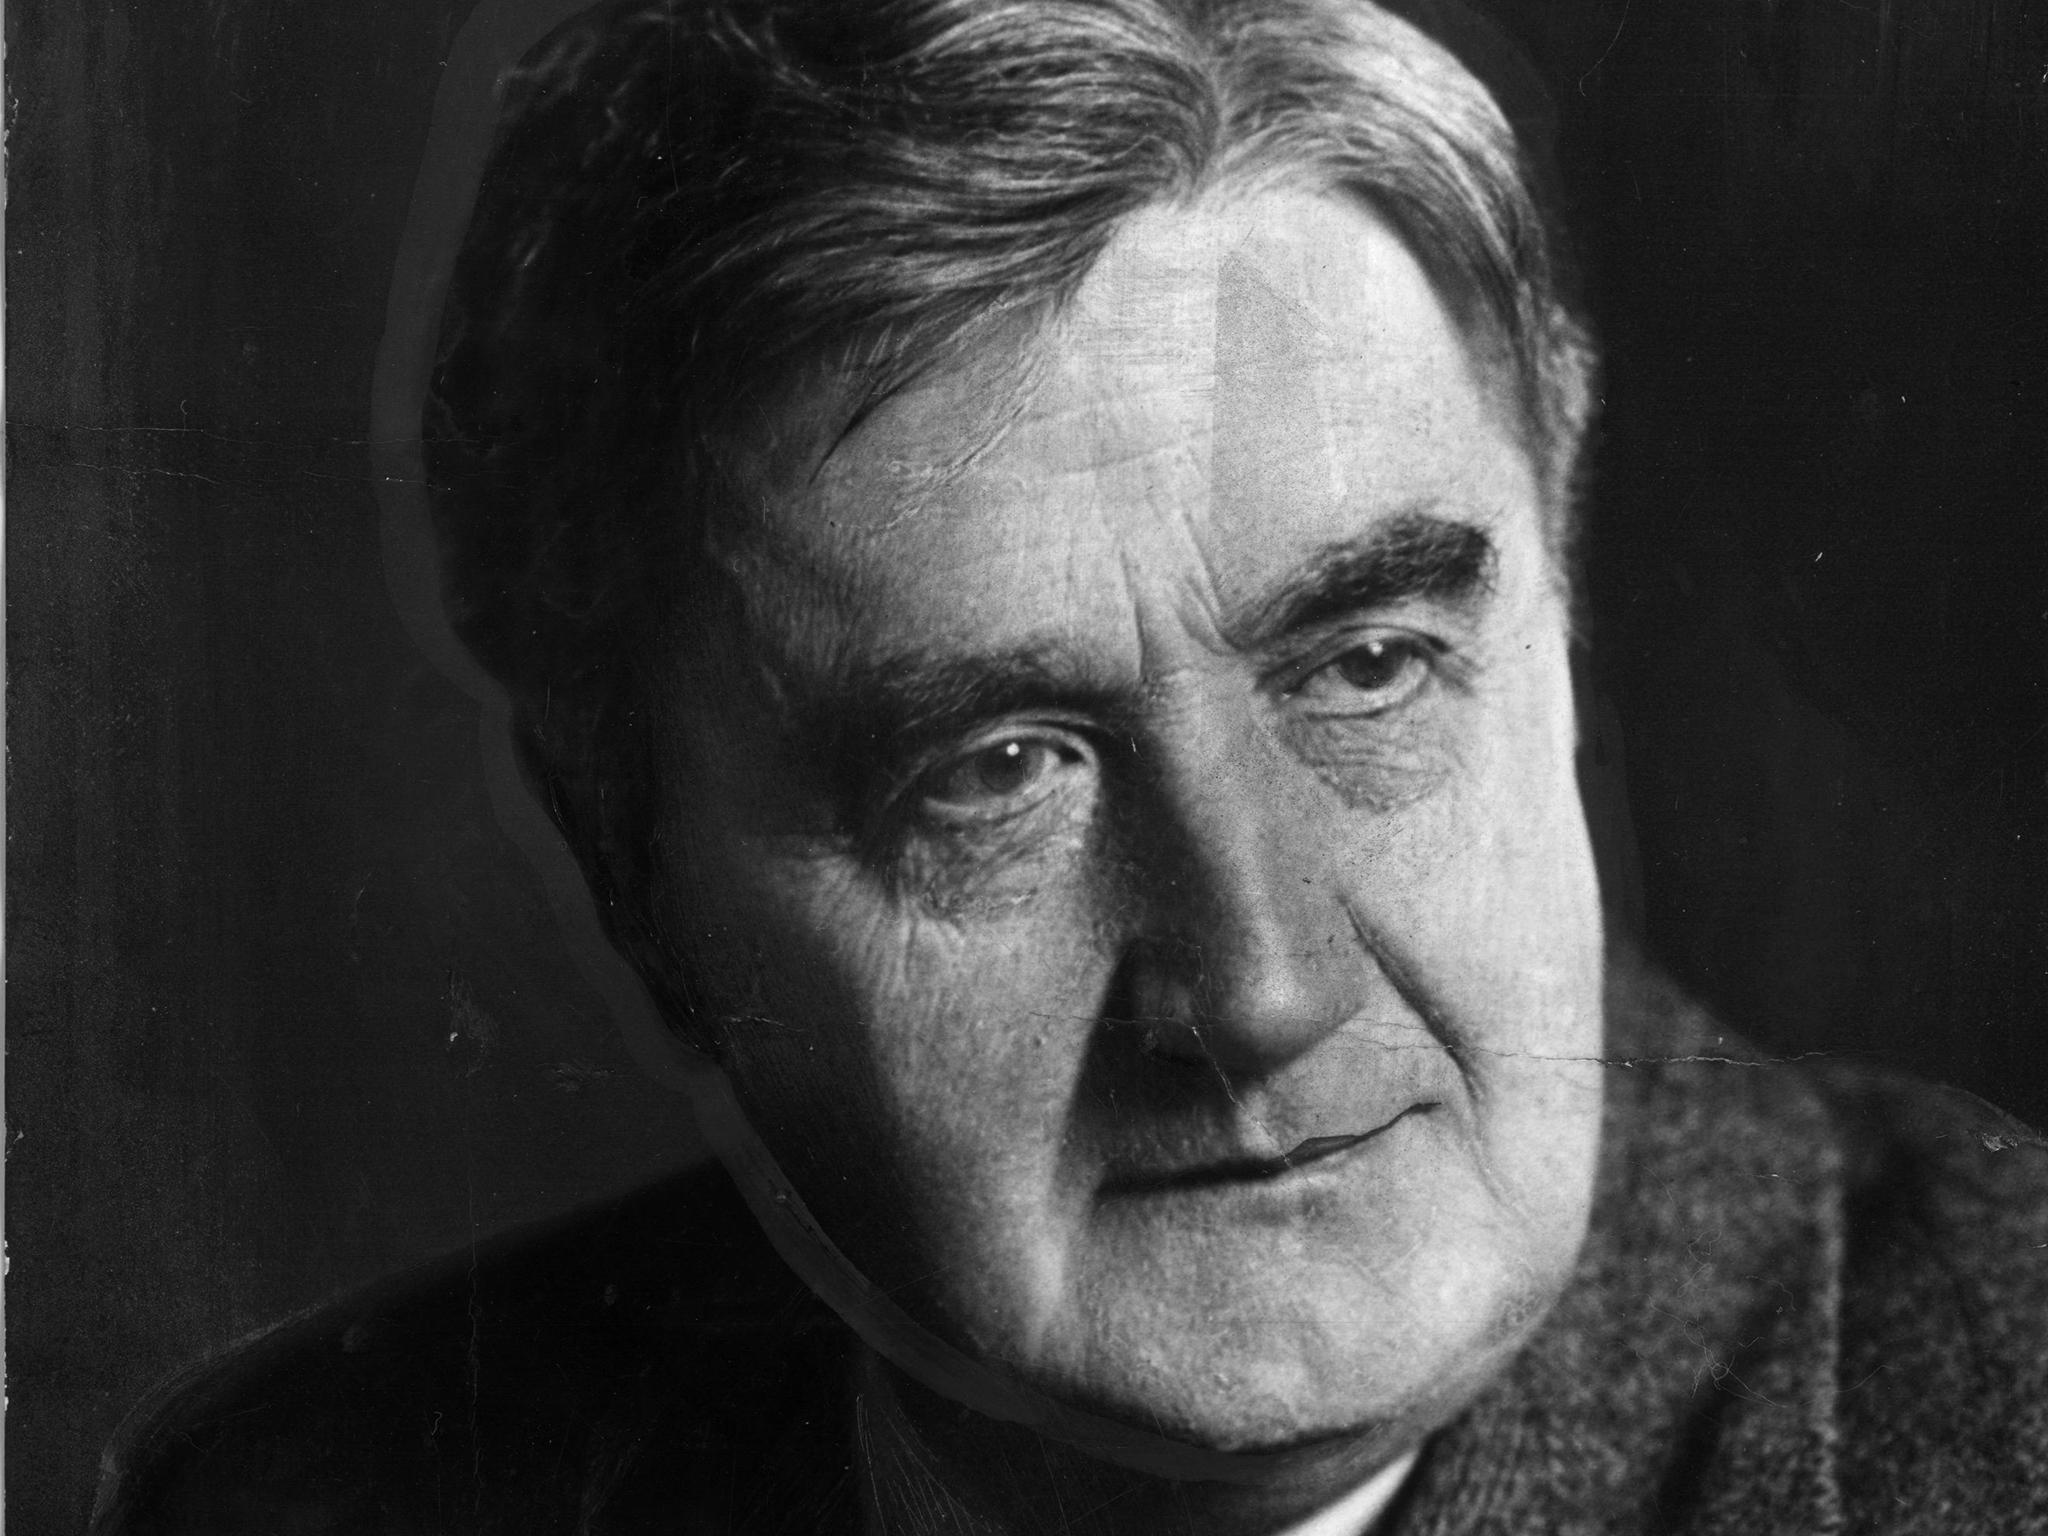 Ralph Vaughan Williams, the composer who wrote "The Lark Ascending"